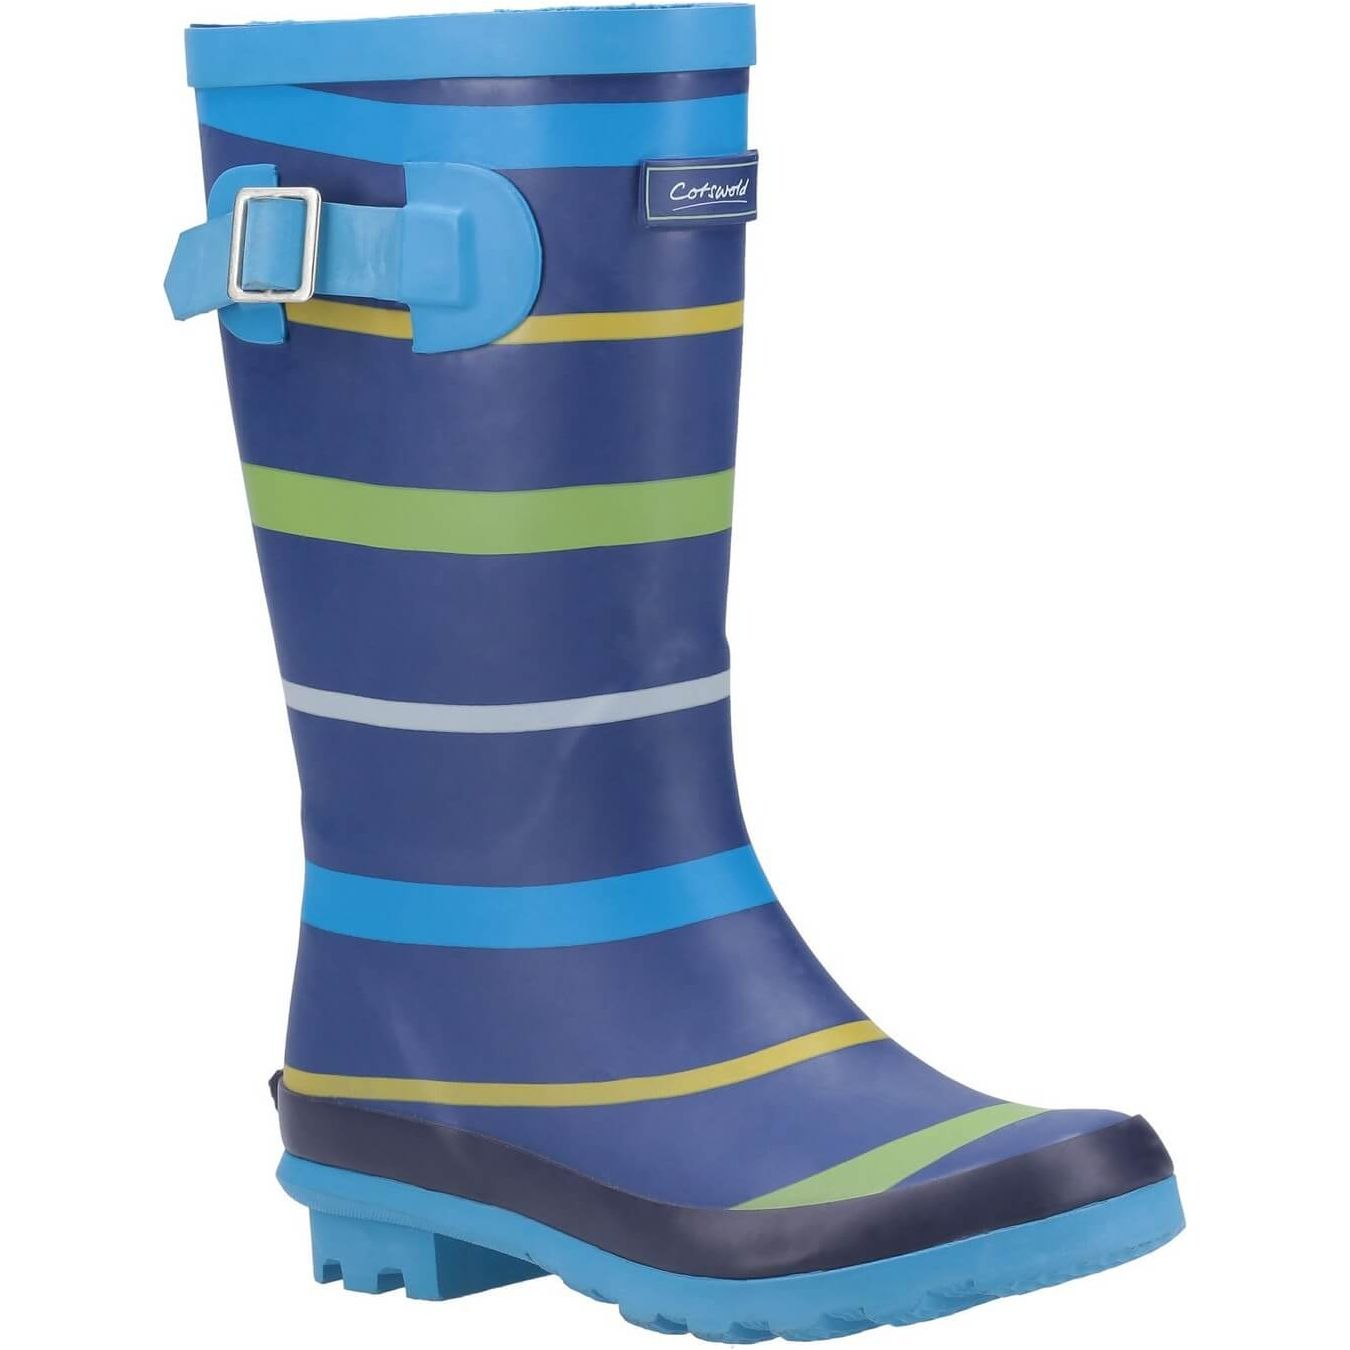 Cotswold Stripe Patterned Wellies-Blue-Green-Yellow-Main